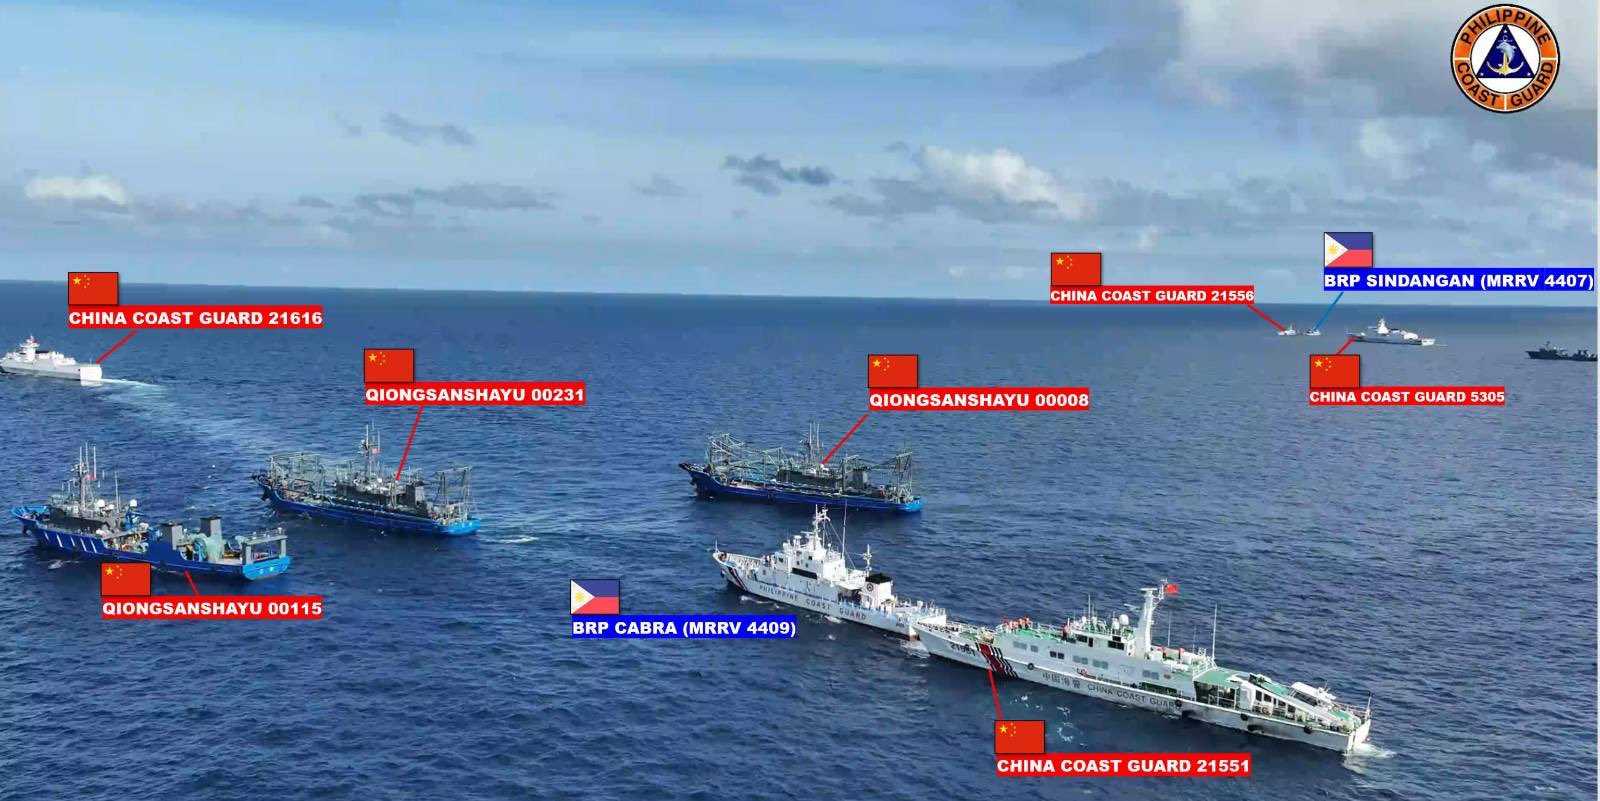 AFP calls China Coast Guard's presence in WPS a 'misplaced bully'